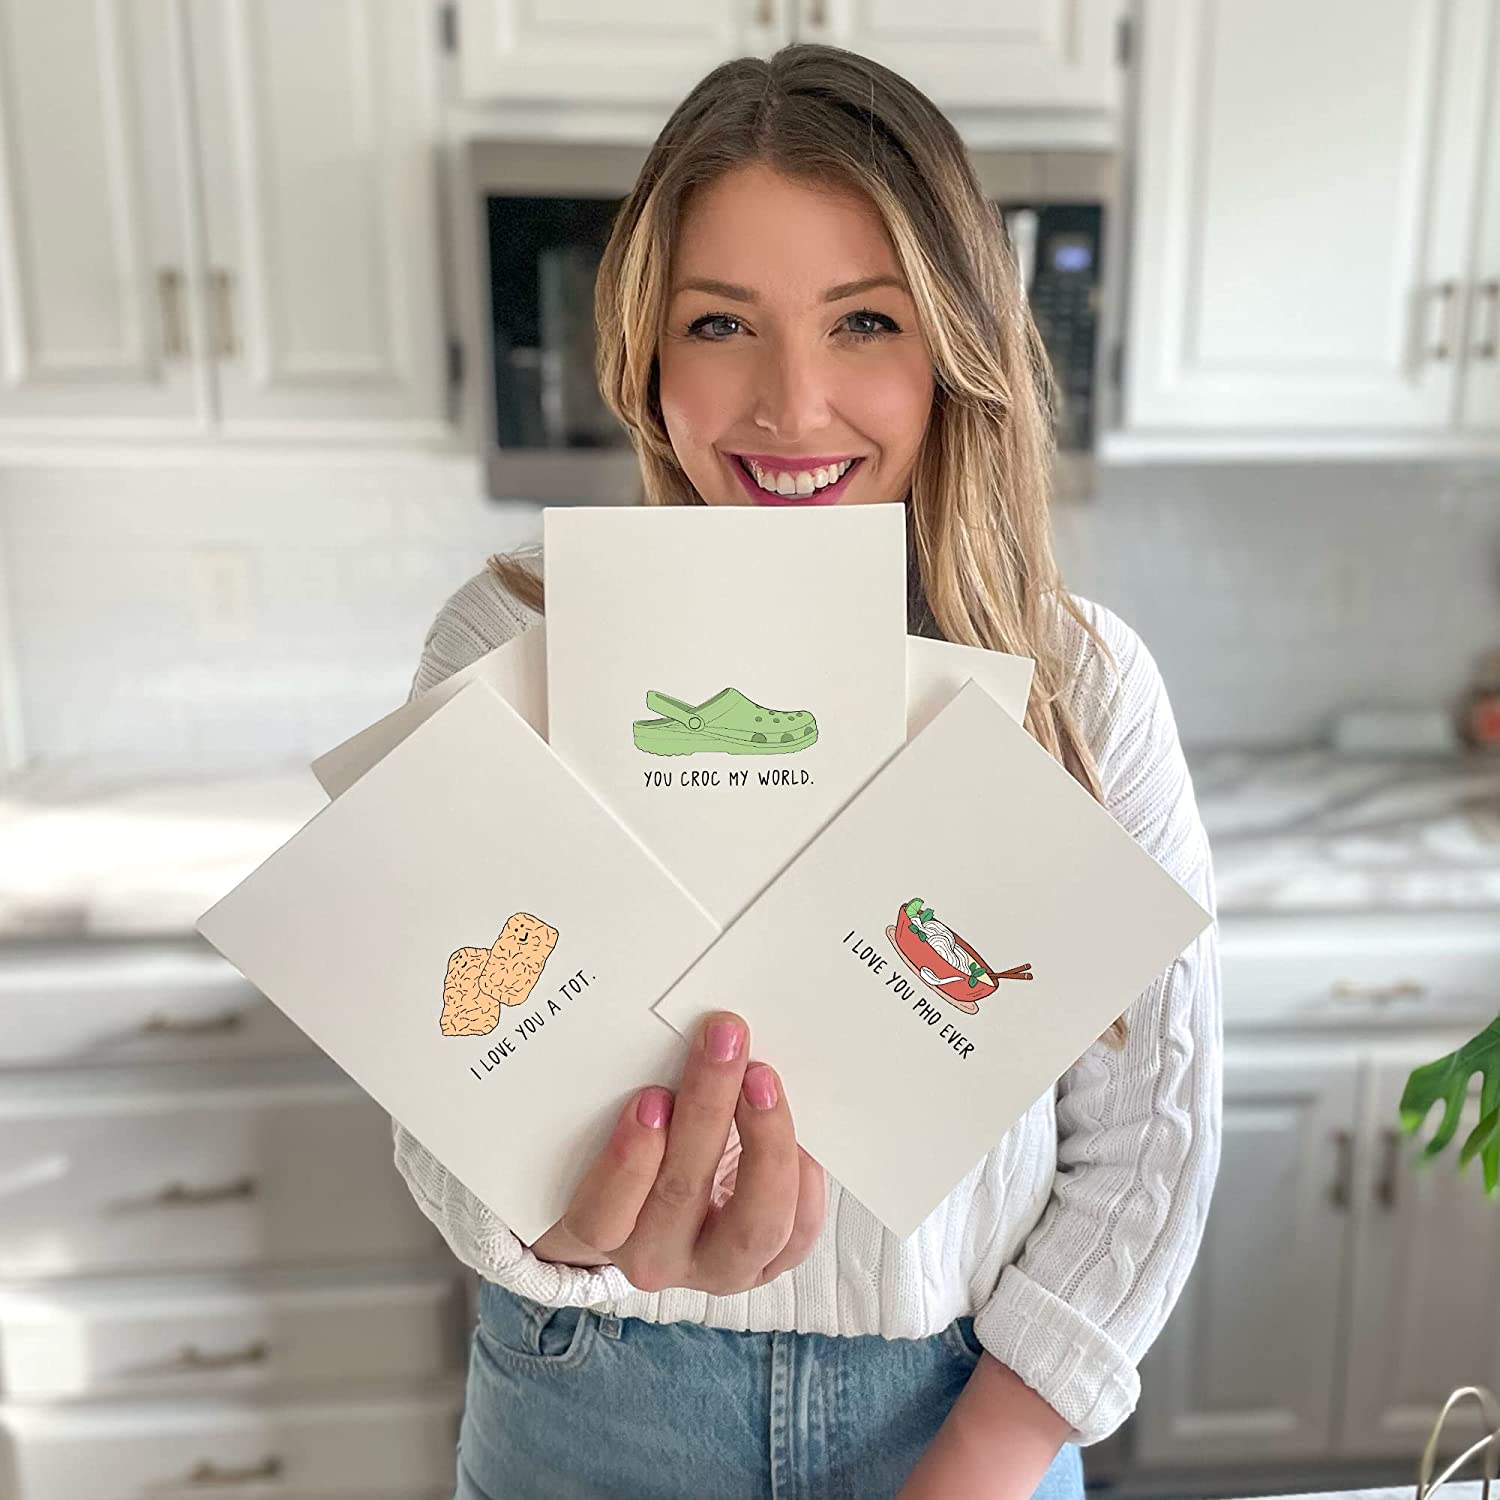 A woman holding up a group of rockdoodles Olive Me Cards including an envelope.